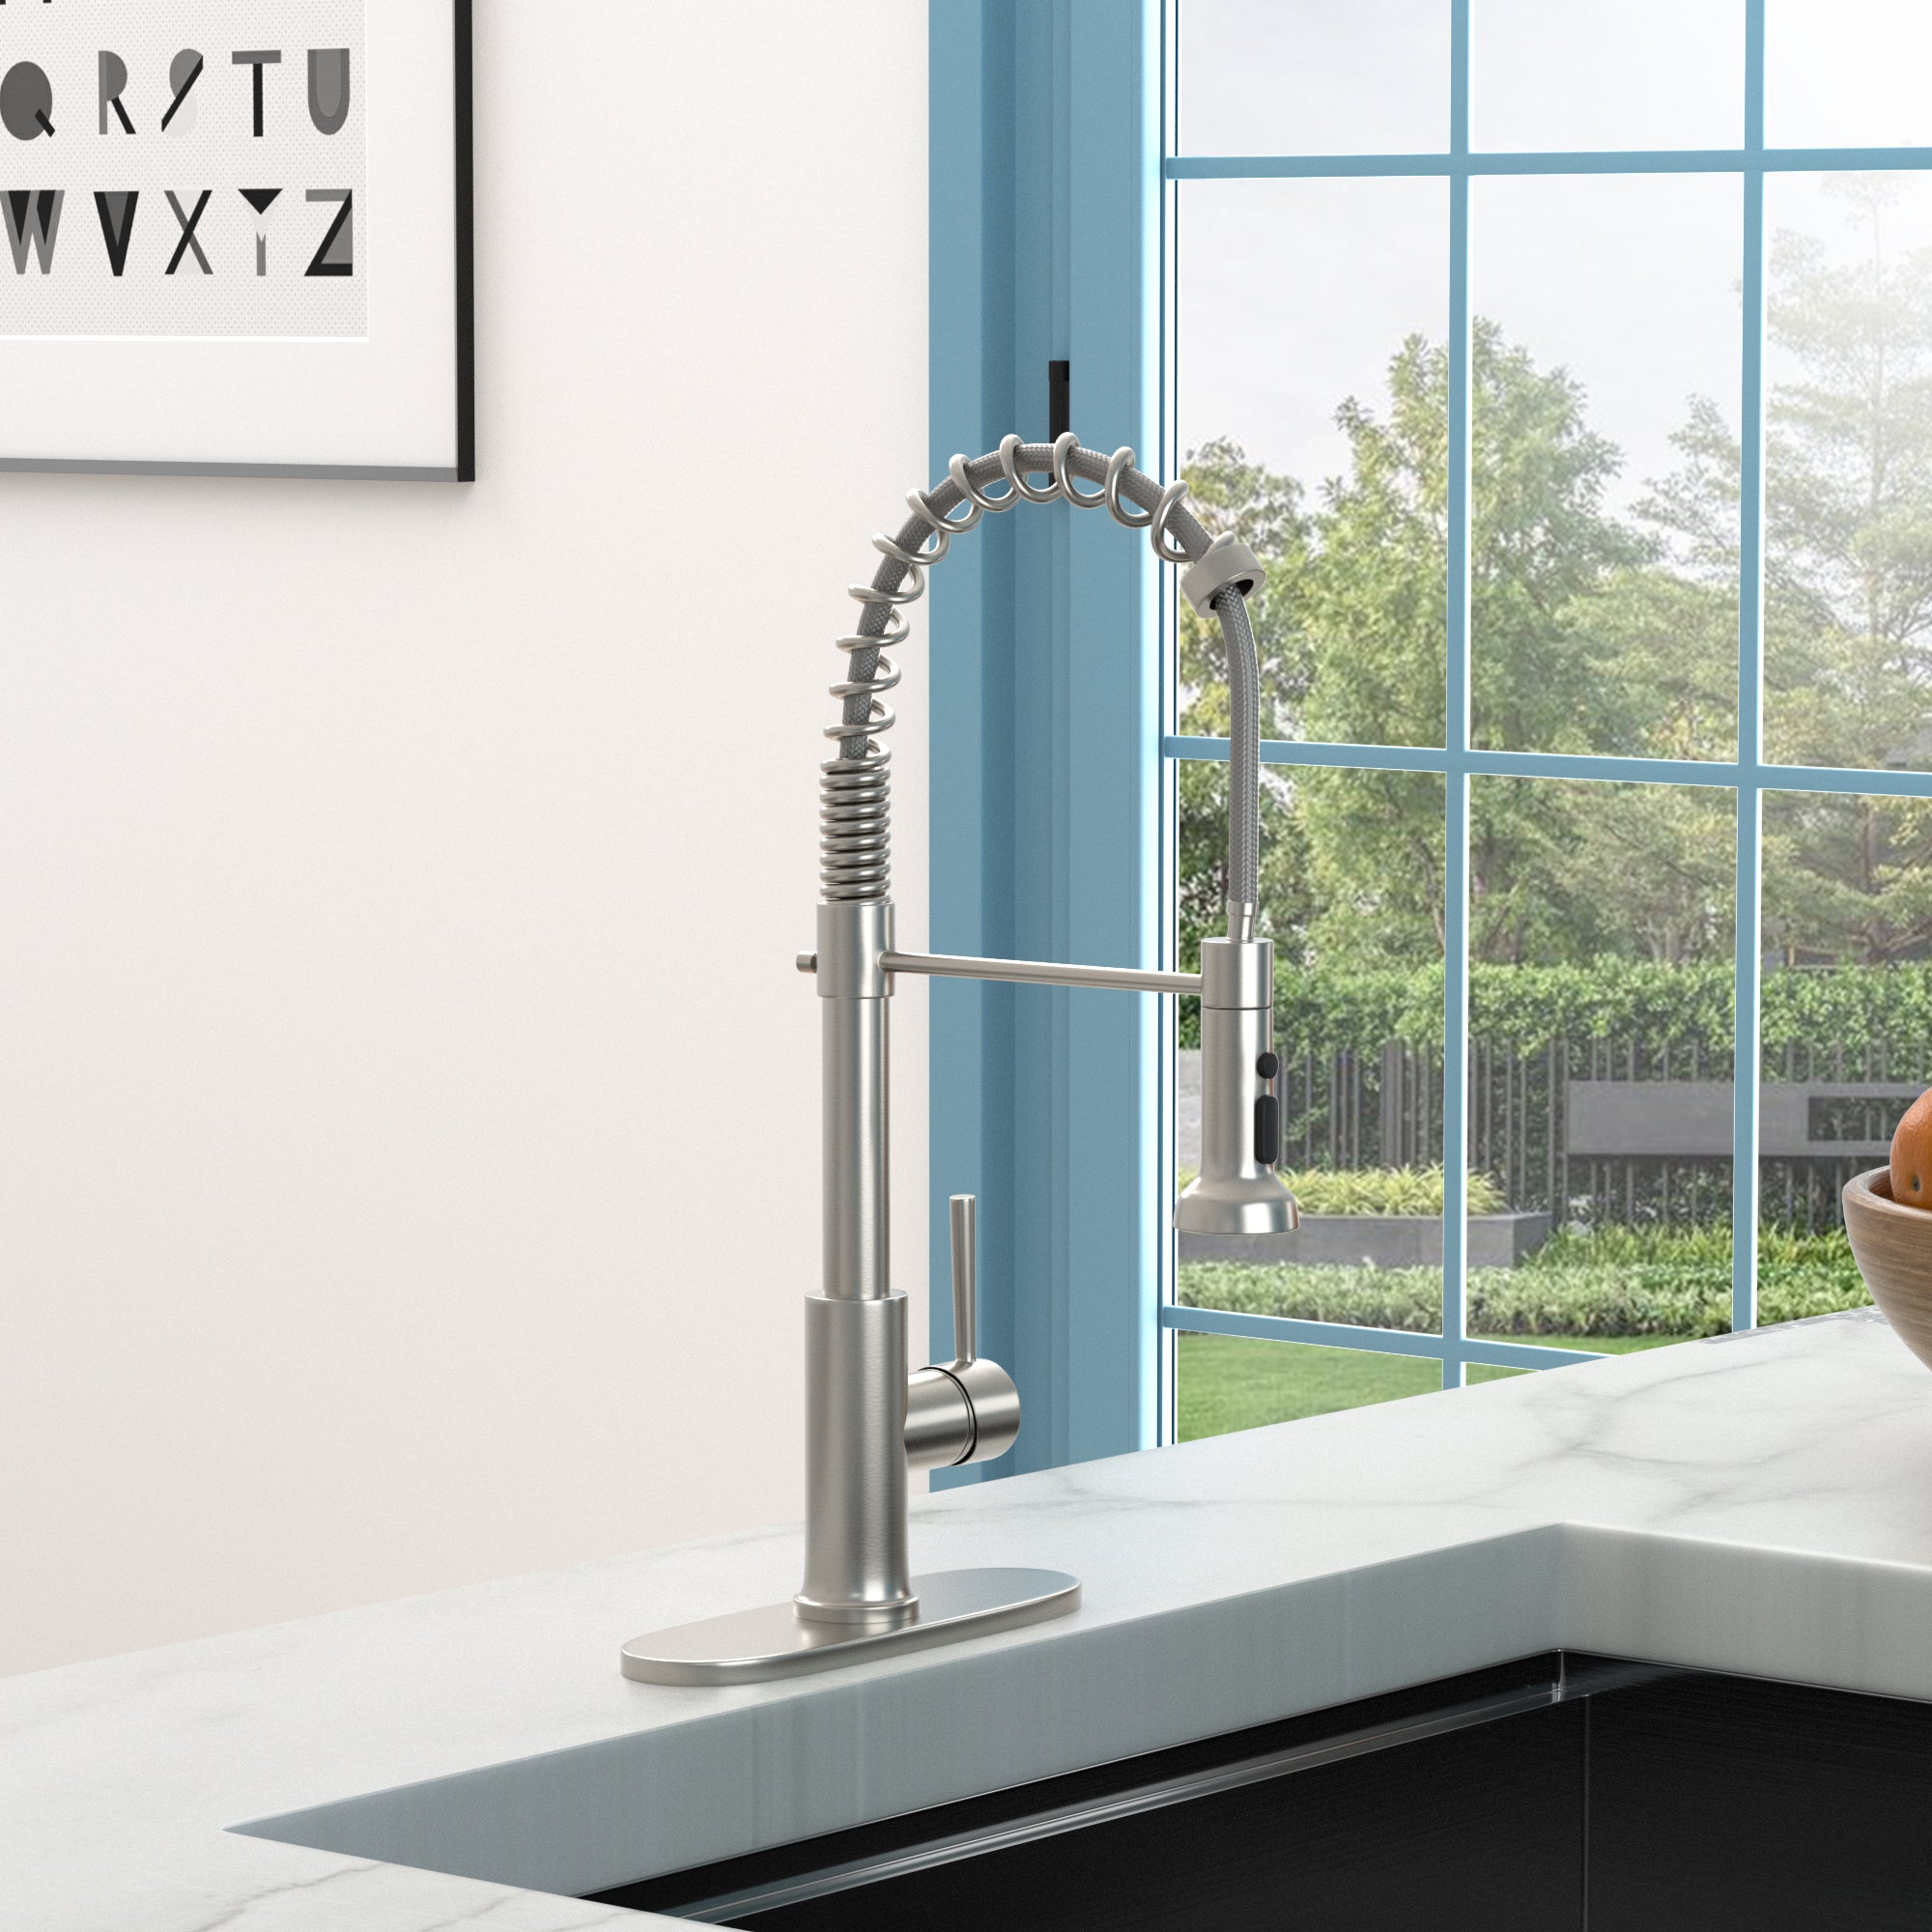 Spray-head Kitchen Faucet with dual-function